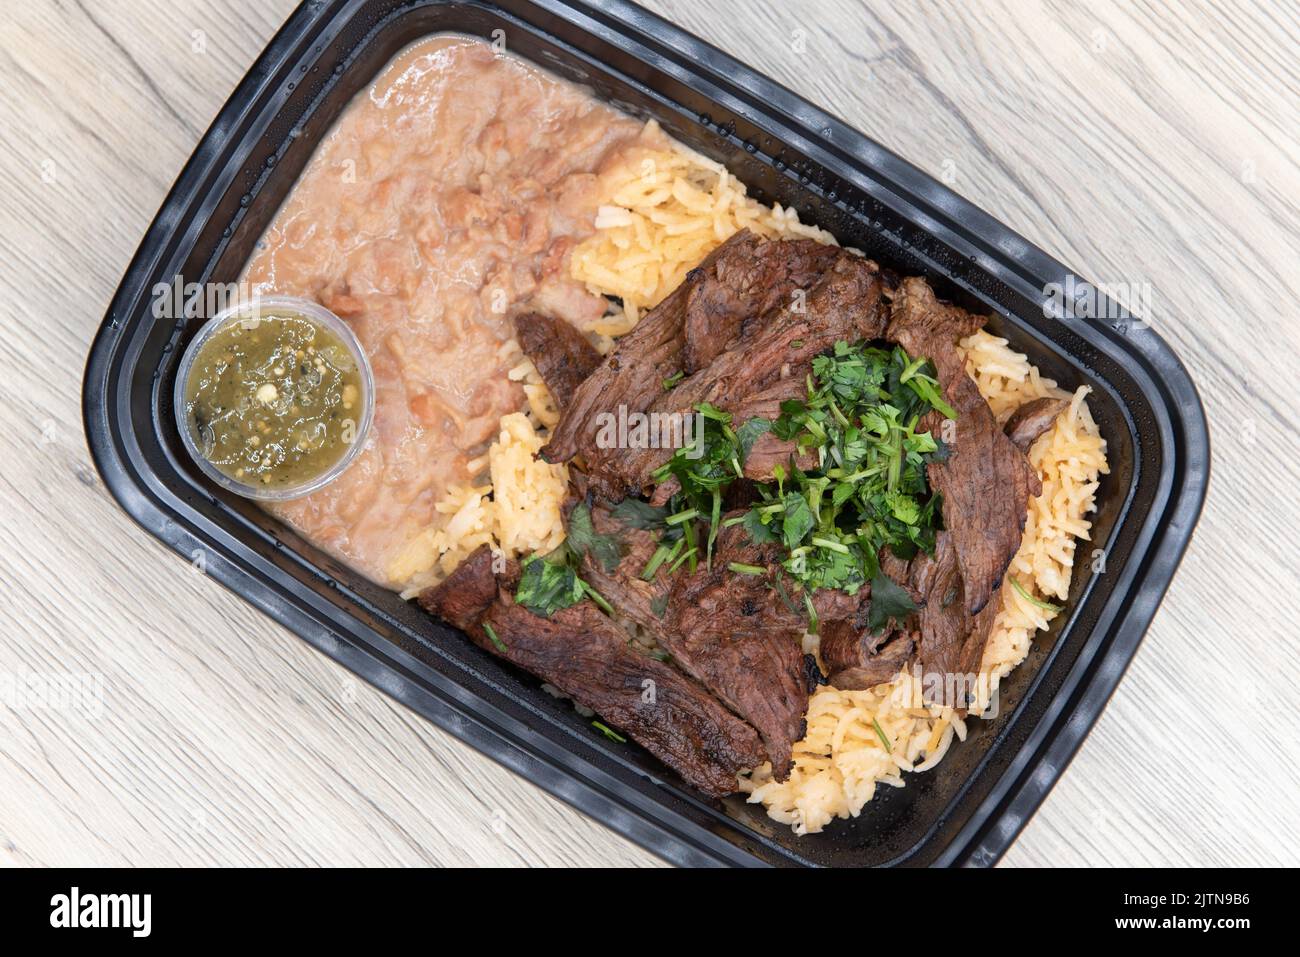 Overhead view of take out order of ranchera with rice and beans is conveniently packed in a microwavable container. Stock Photo